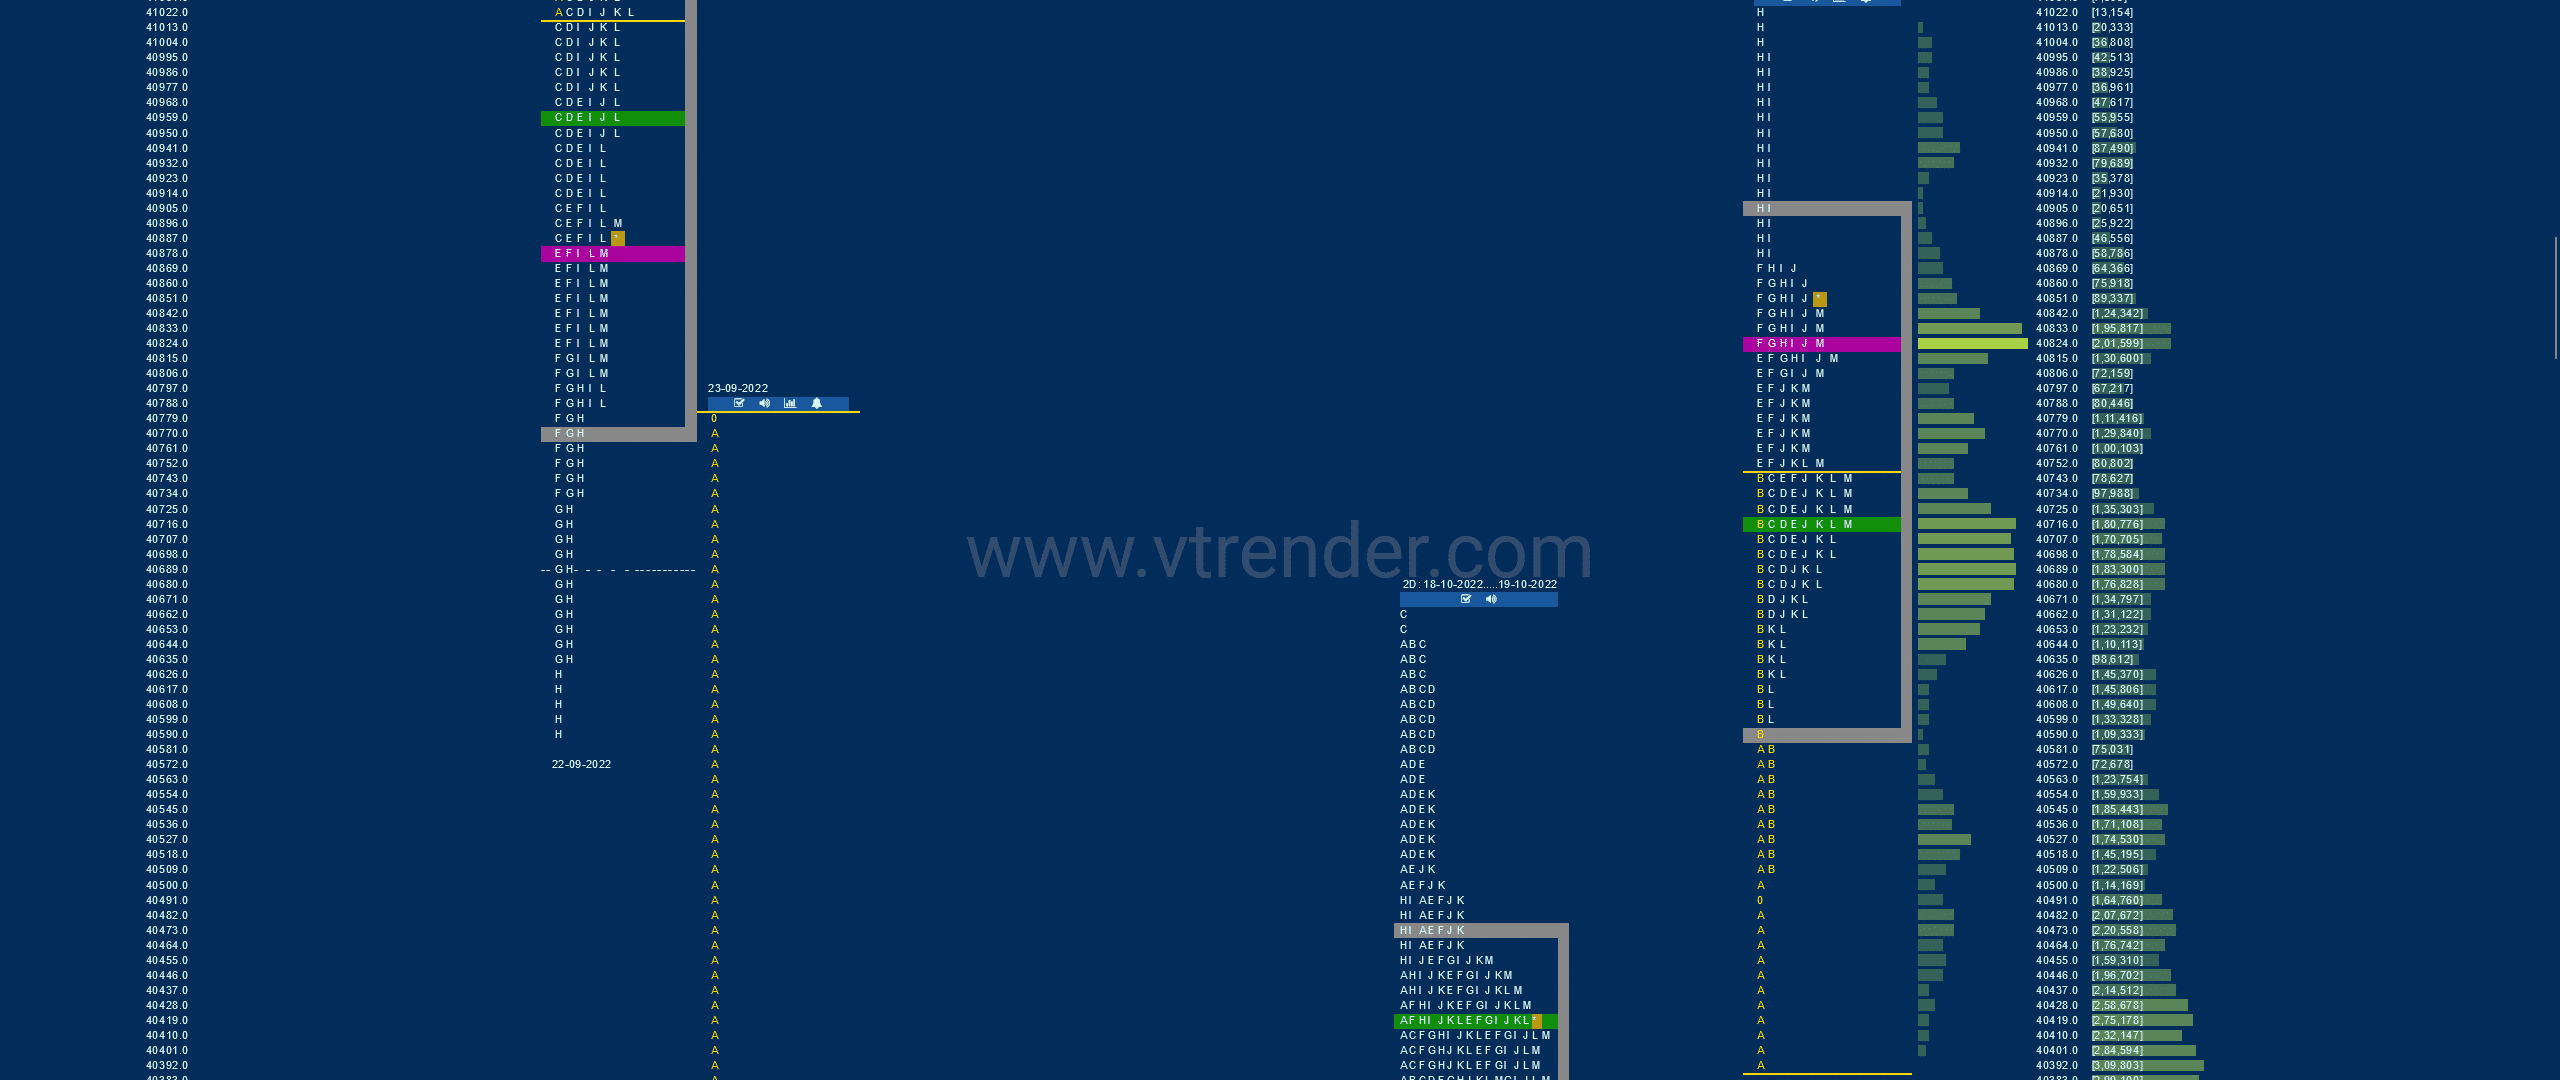 Bnf 14 Market Profile Analysis Dated 21St Oct 2022 Banknifty Futures, Charts, Day Trading, Intraday Trading, Intraday Trading Strategies, Market Profile, Market Profile Trading Strategies, Nifty Futures, Order Flow Analysis, Support And Resistance, Technical Analysis, Trading Strategies, Volume Profile Trading